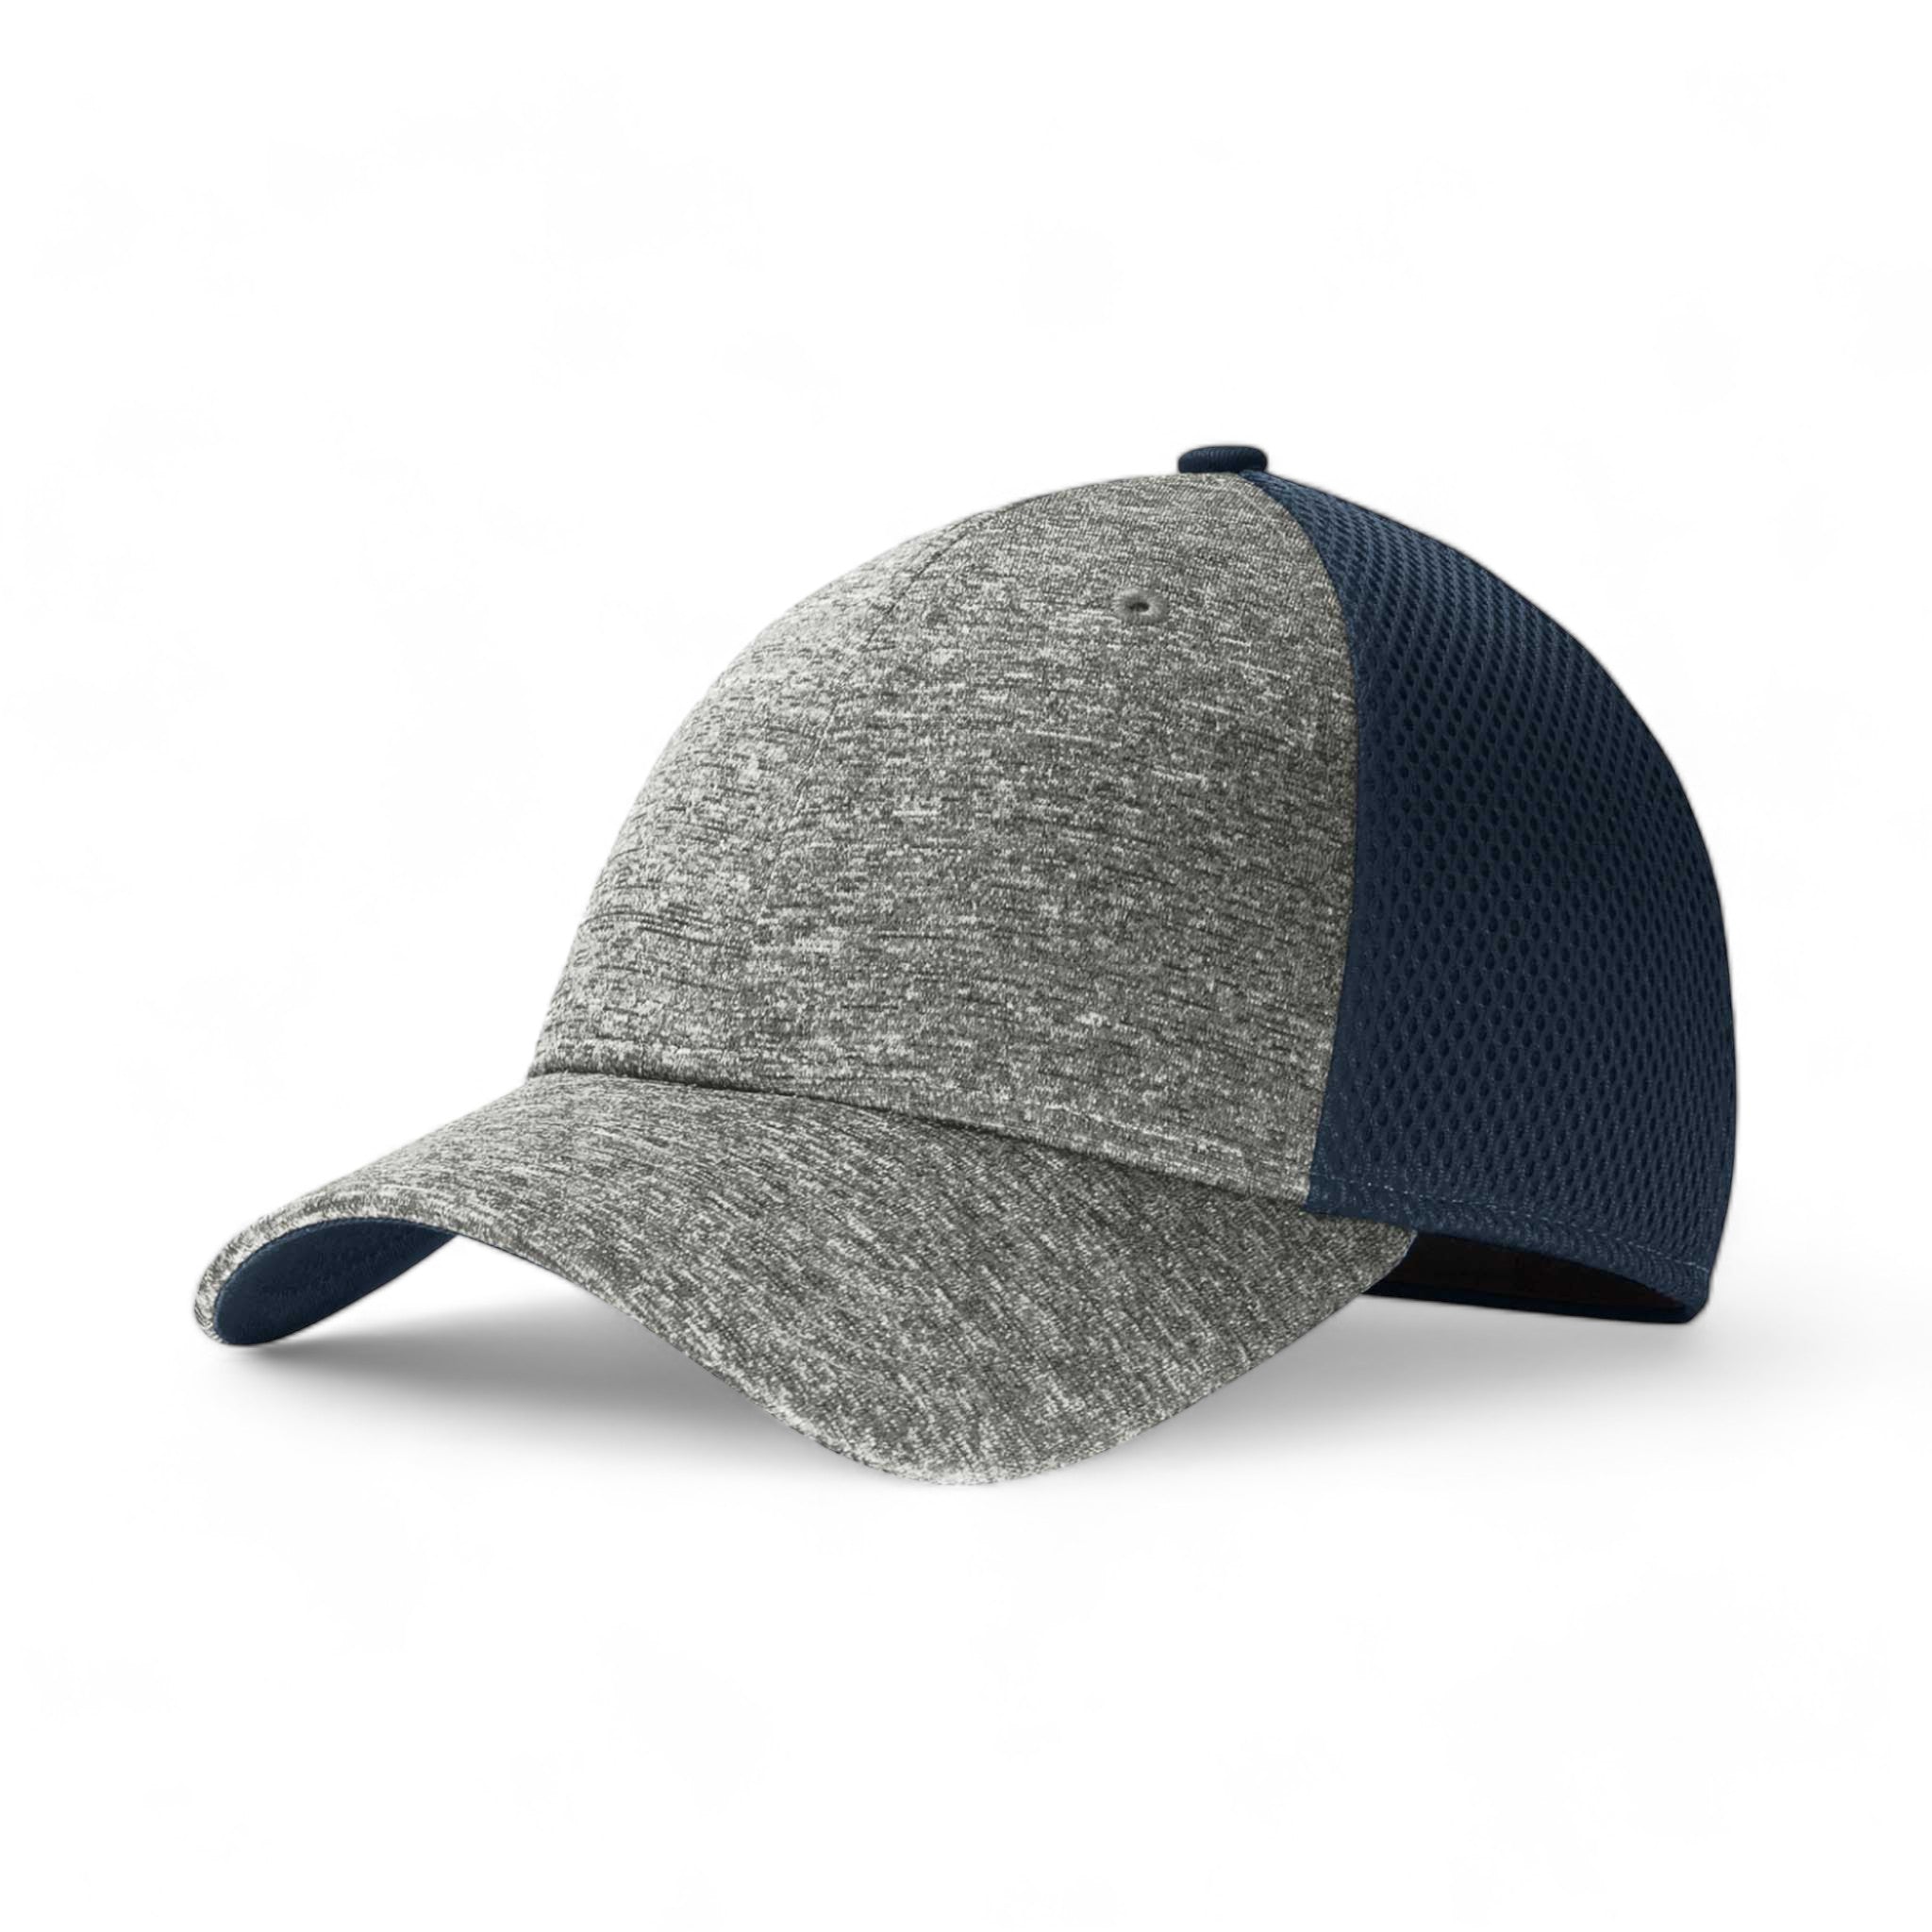 Side view of New Era NE702 custom hat in deep navy and shadow heather